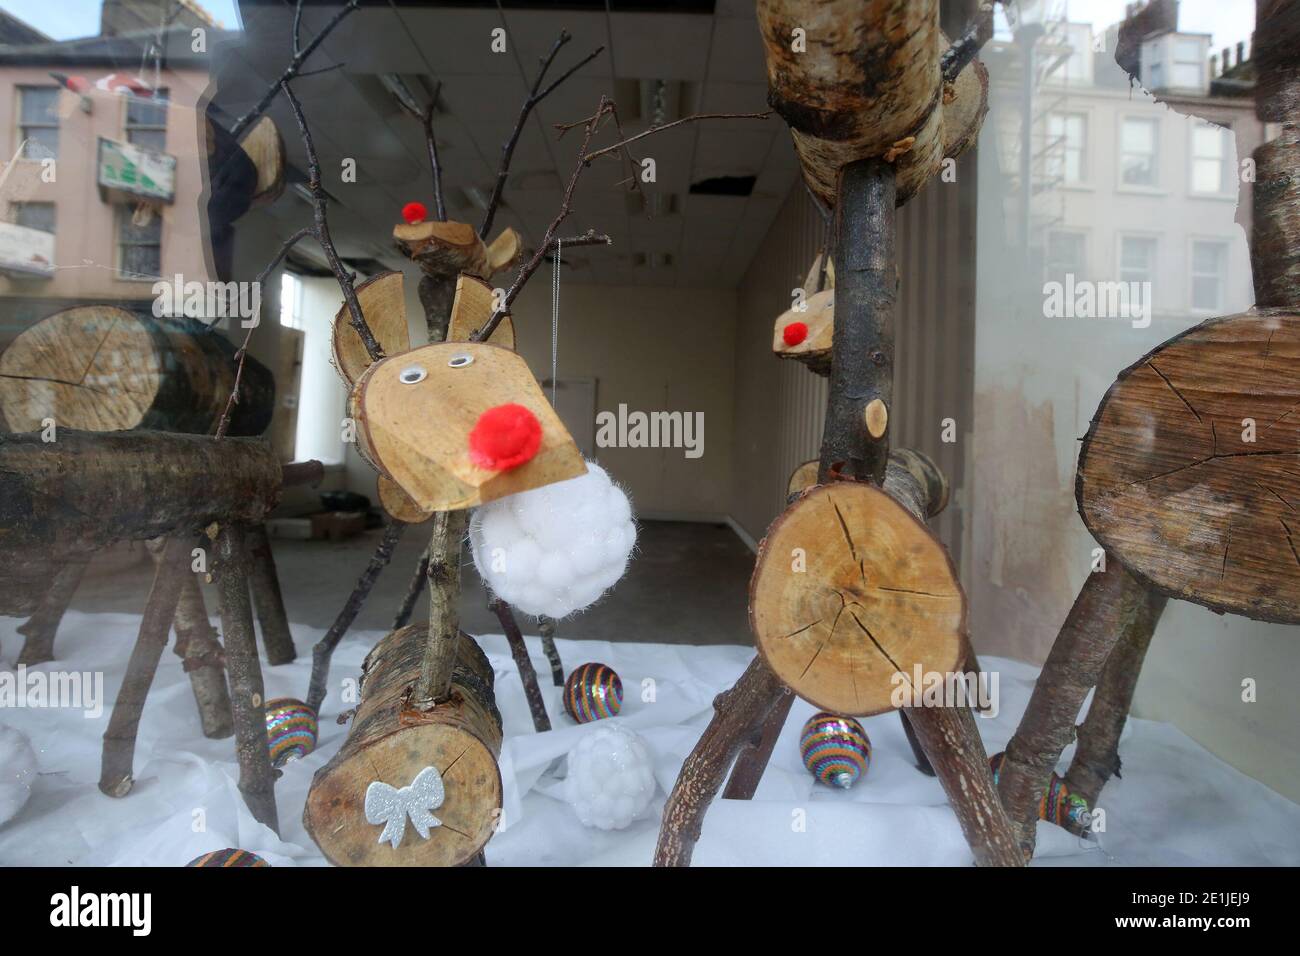 Ayr, Ayrshire, Scotland, UK. Wooden reindeer made from logs in shop window part of South Ayrshire Council's Winter Wonderland Stock Photo